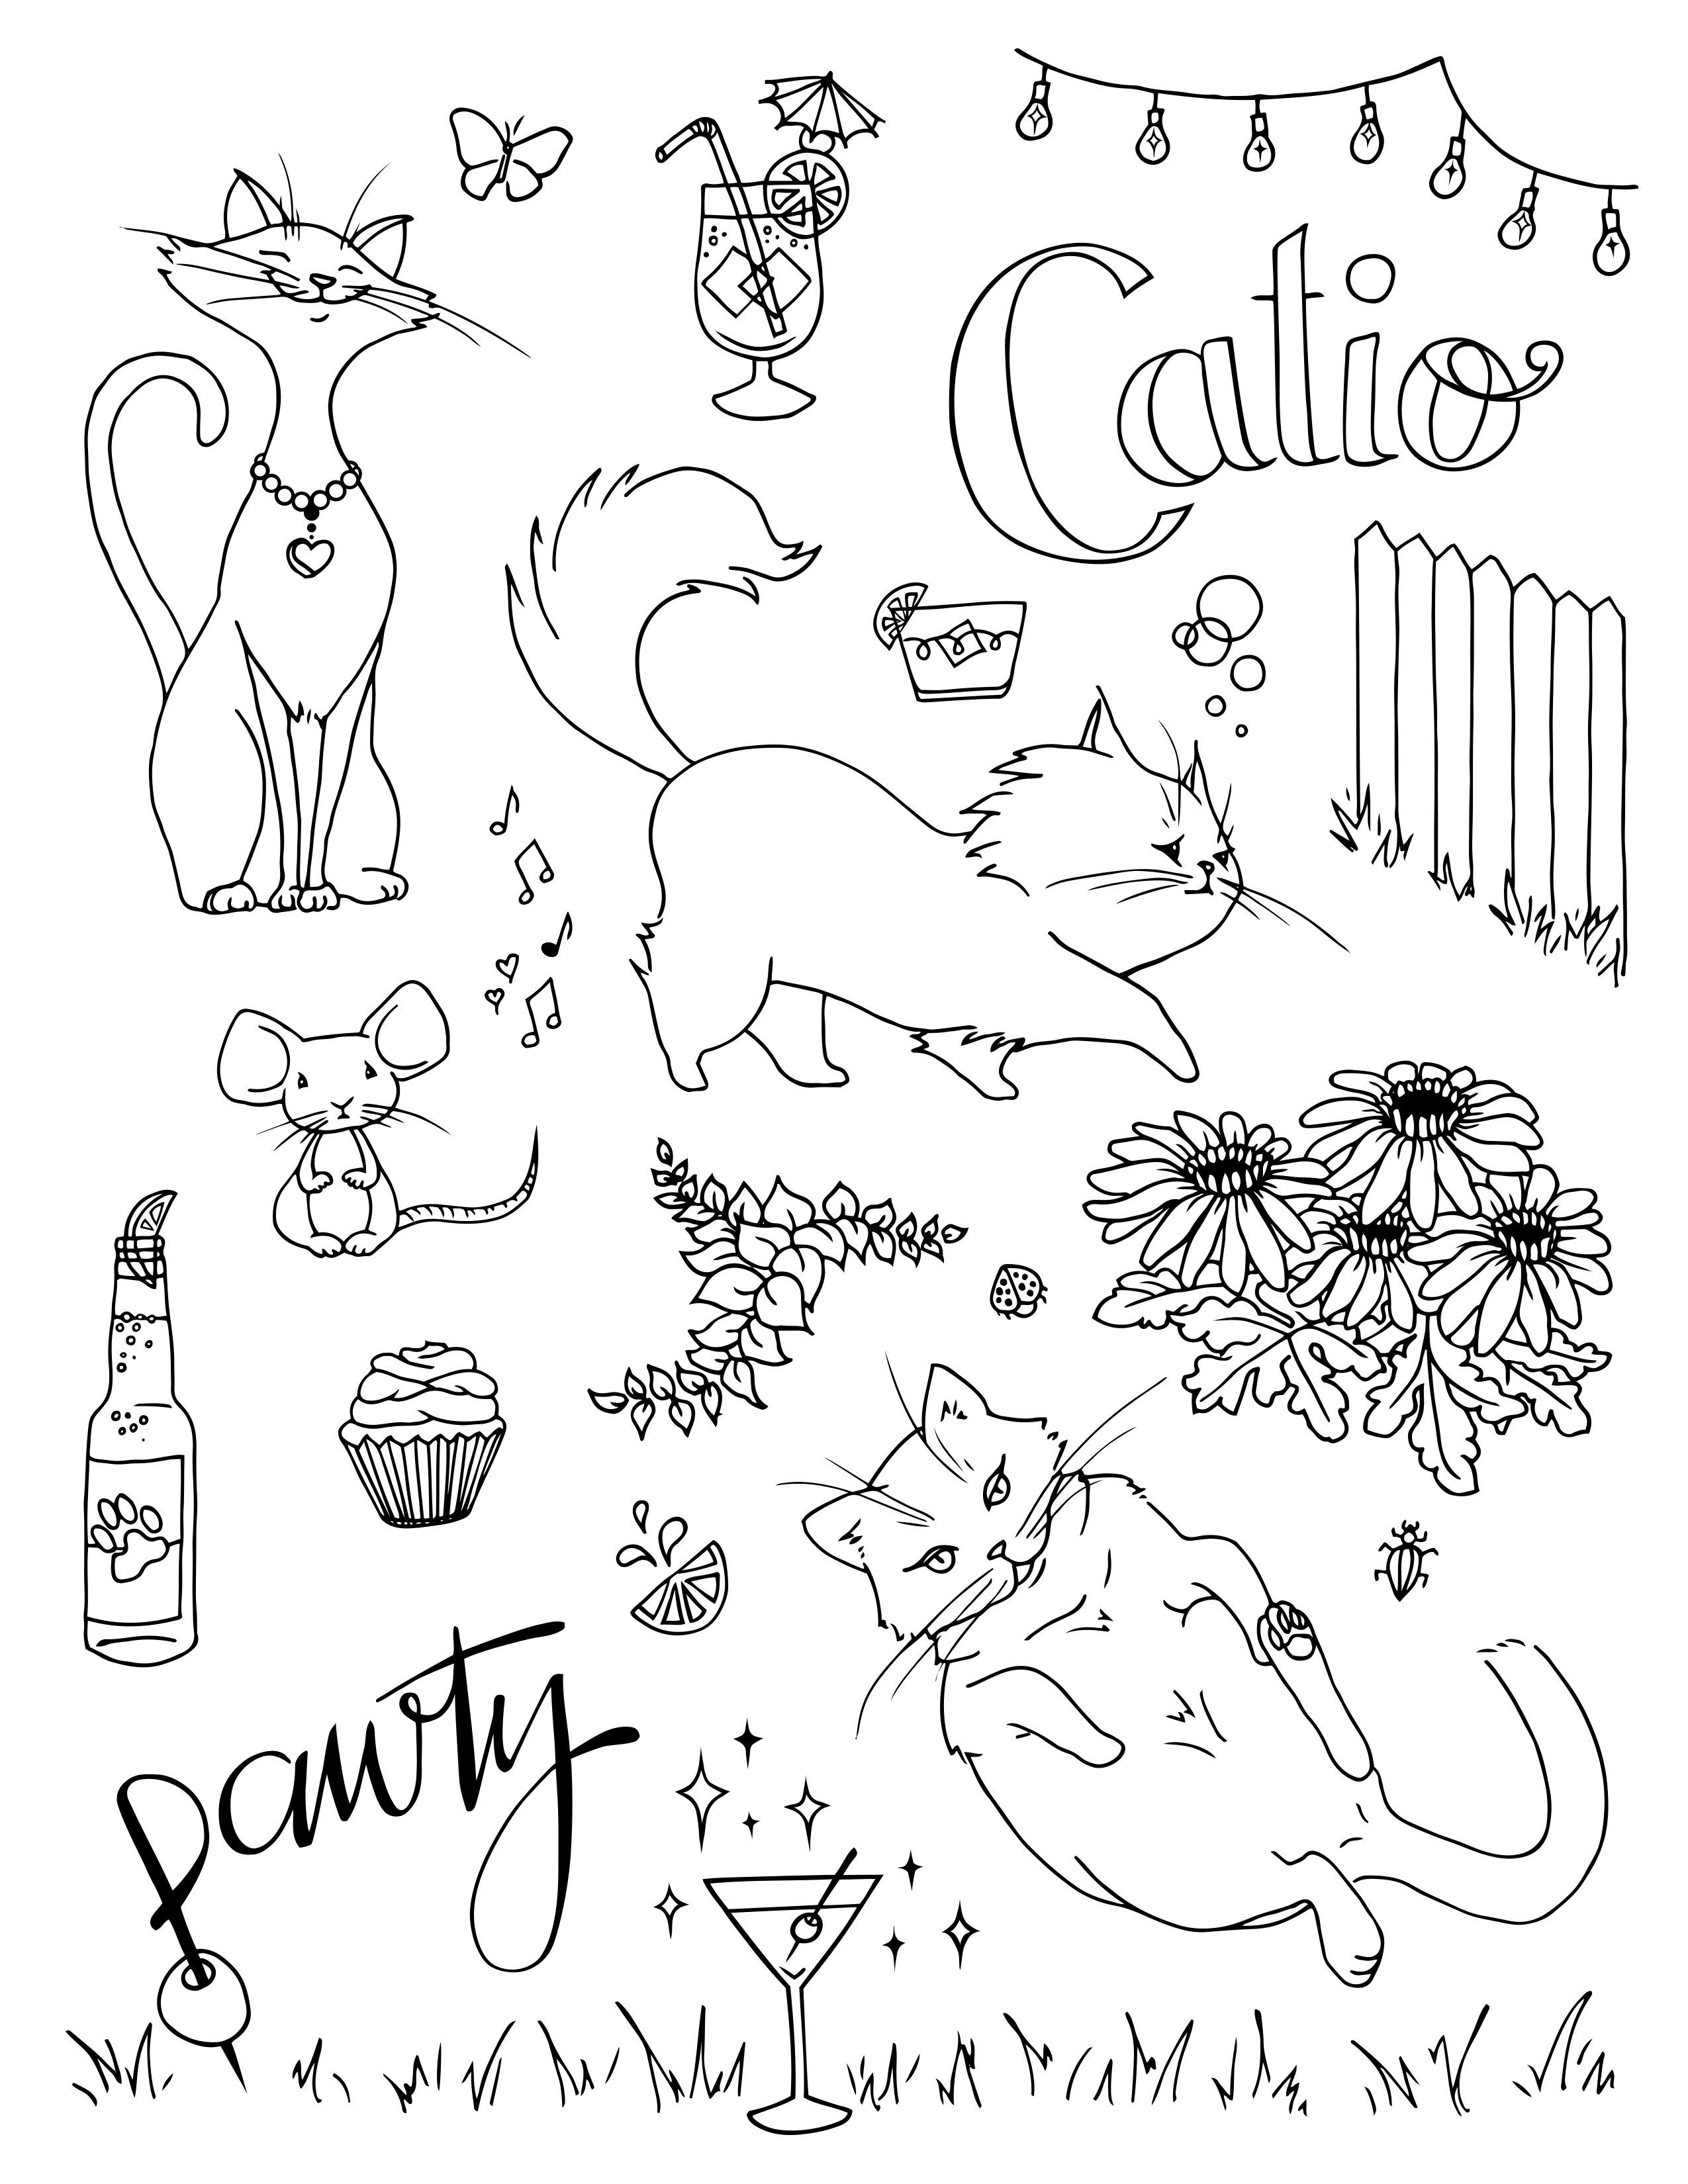 Catio Pawty Illustration Vertical